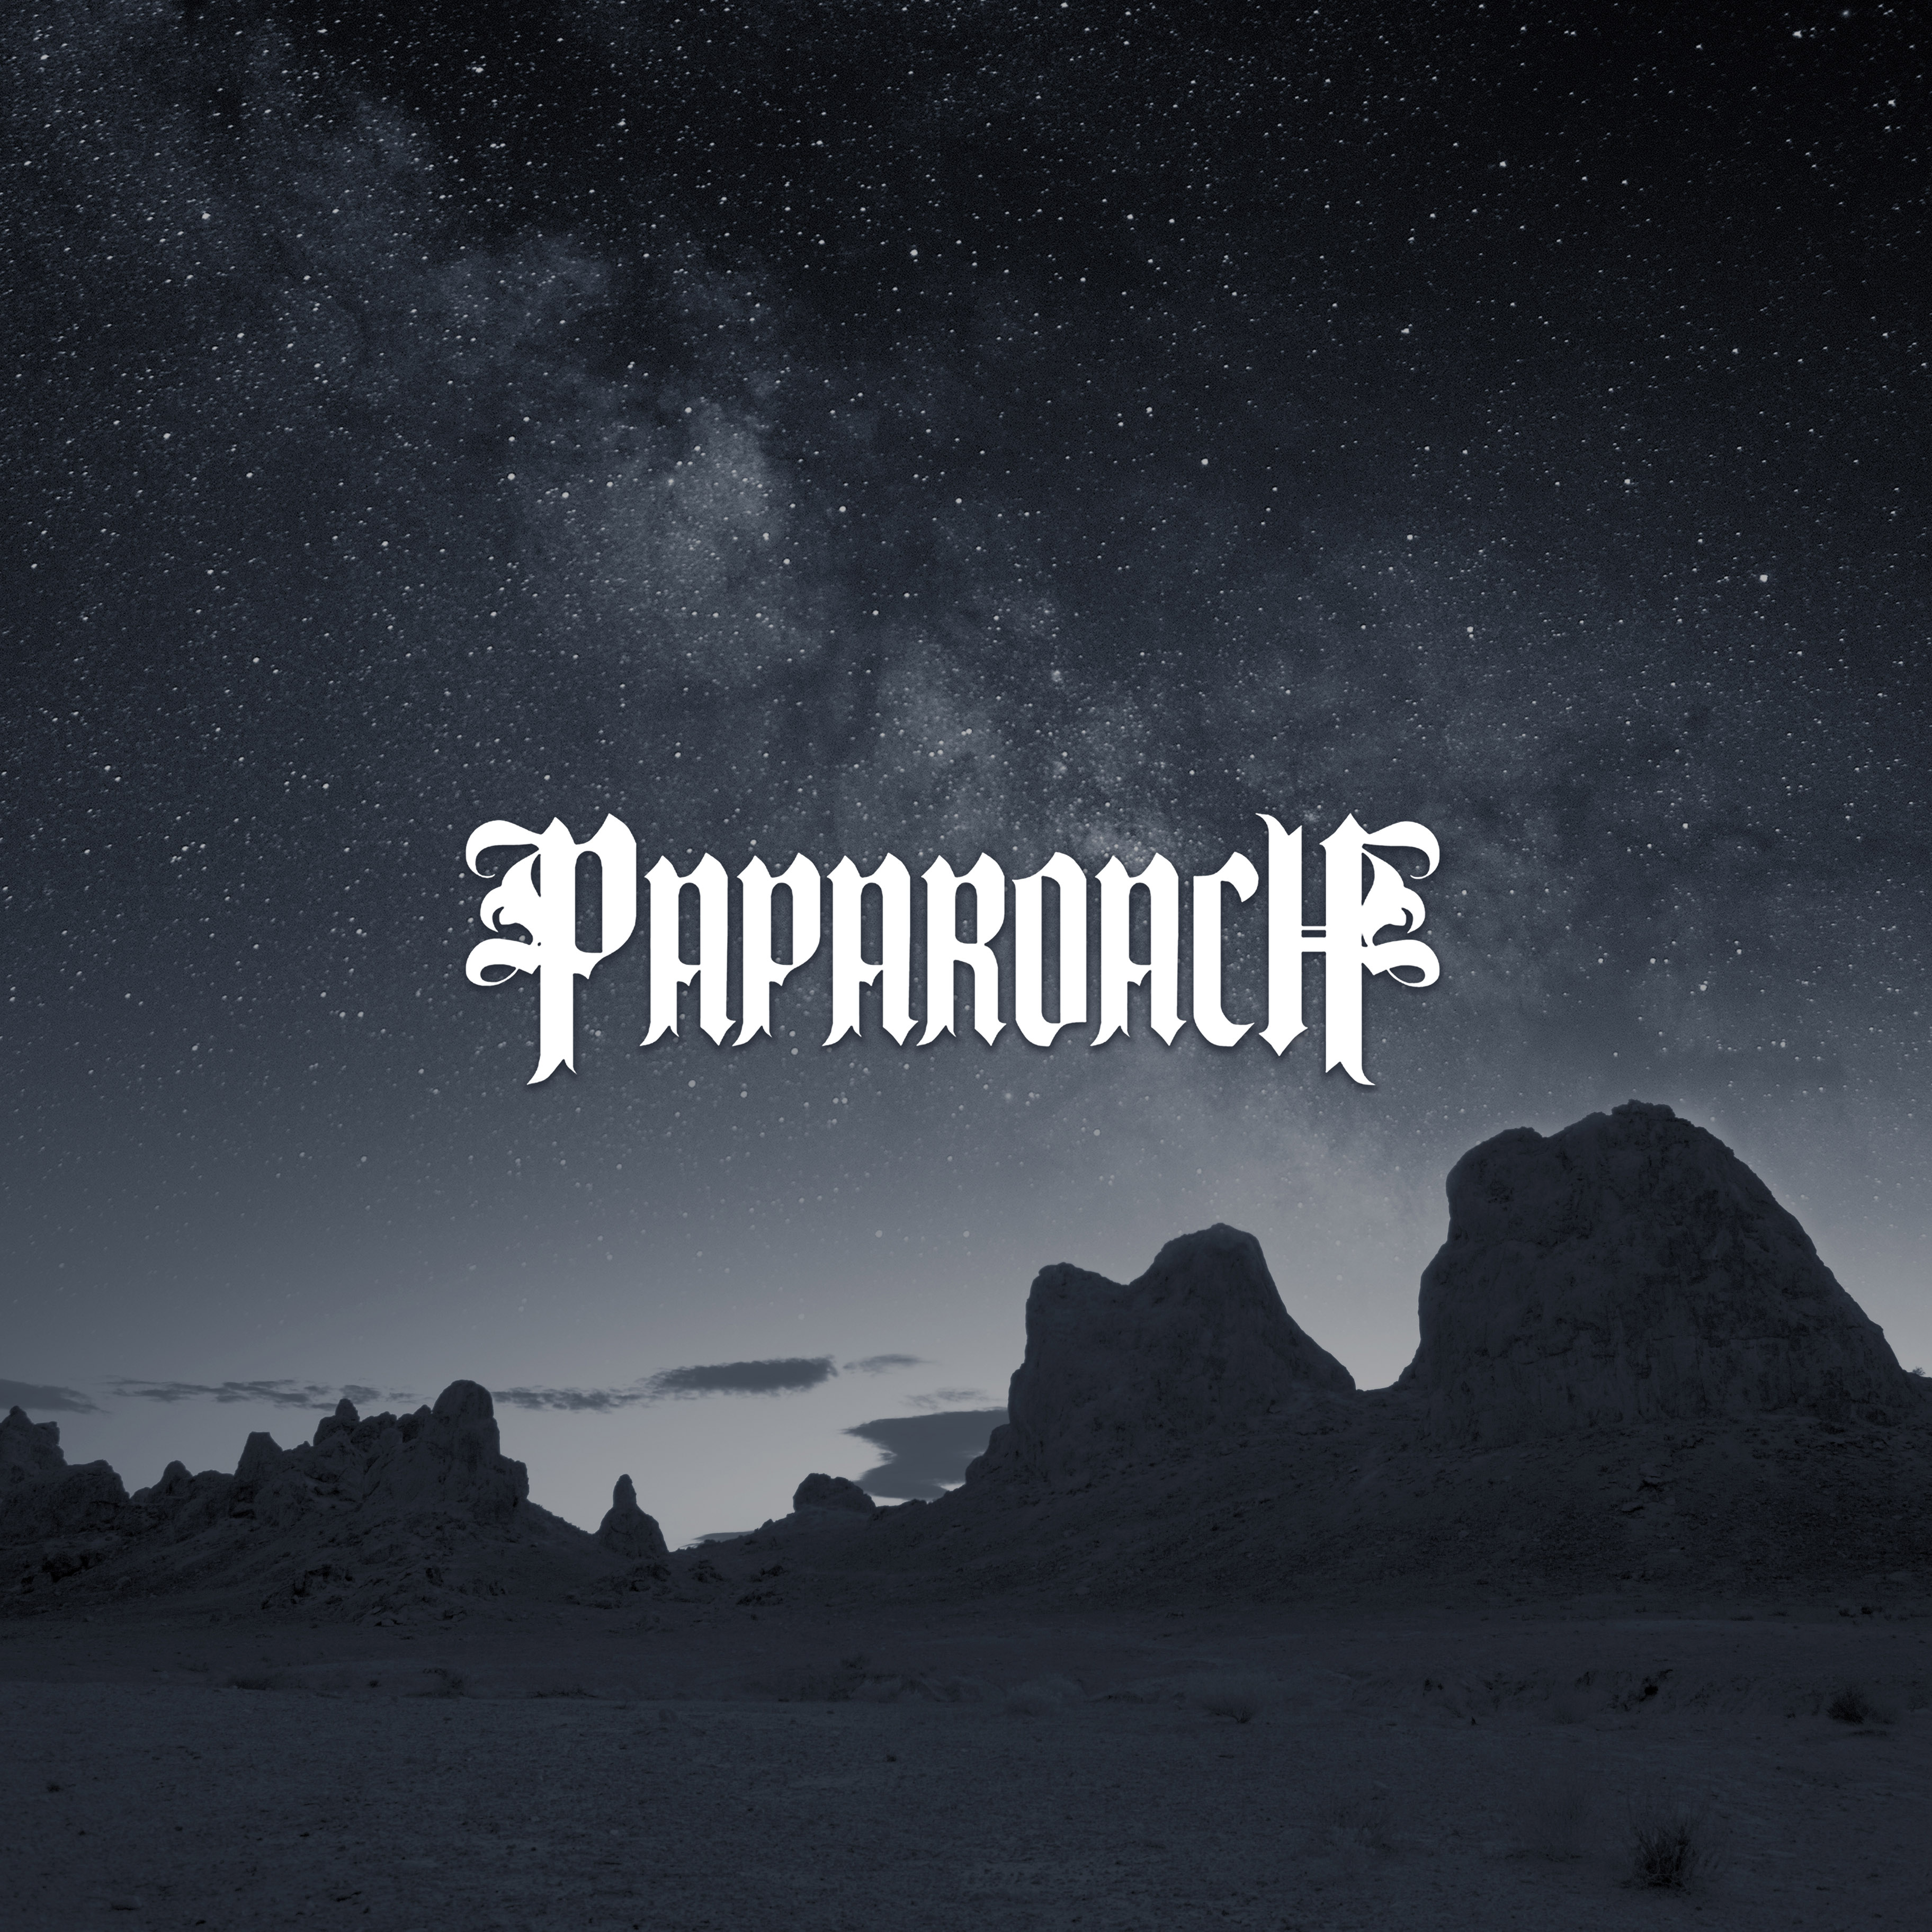 Get A Customized Papa Roach Wallpaper For Your Phone